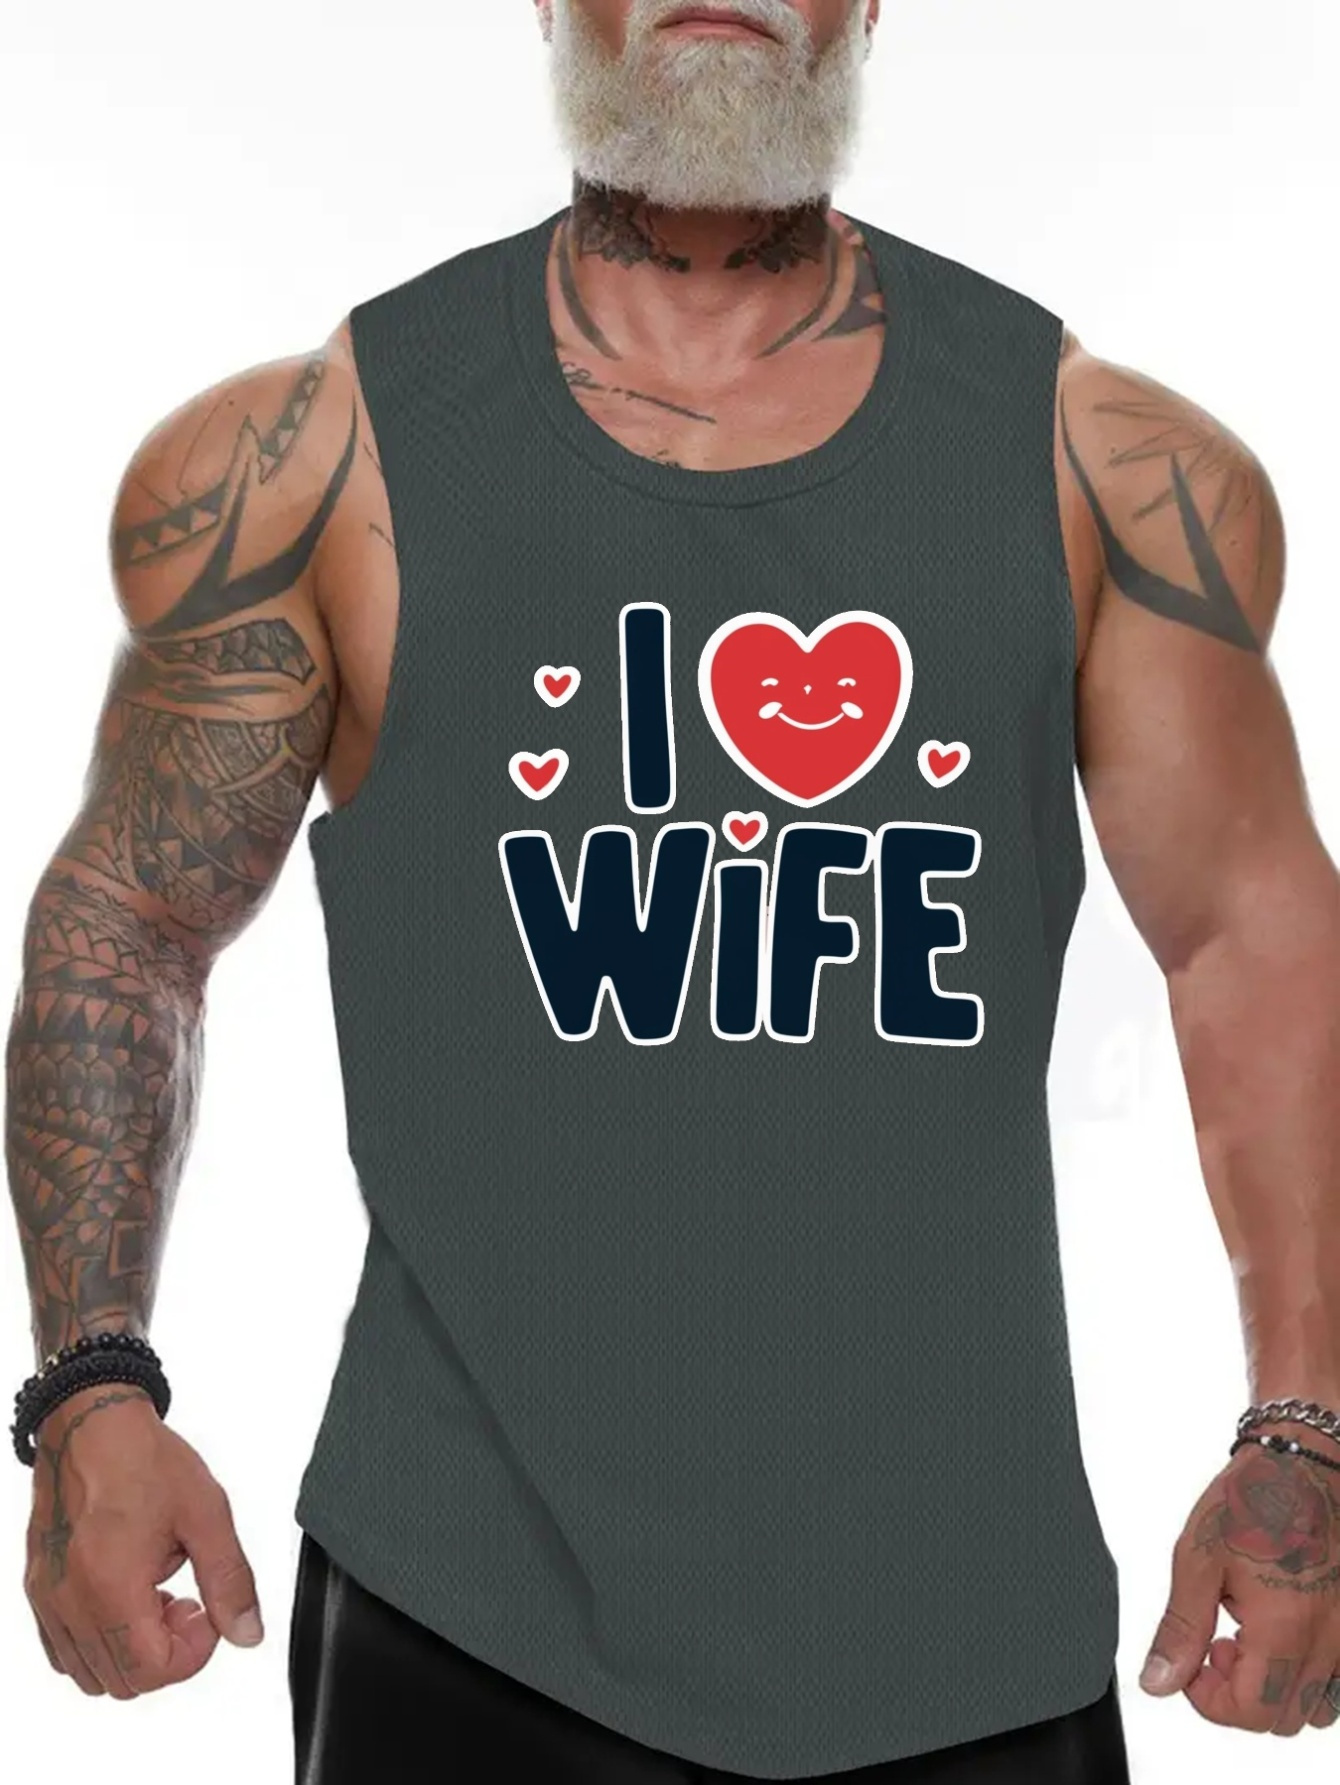 My Other Shirt is a Wife Beater